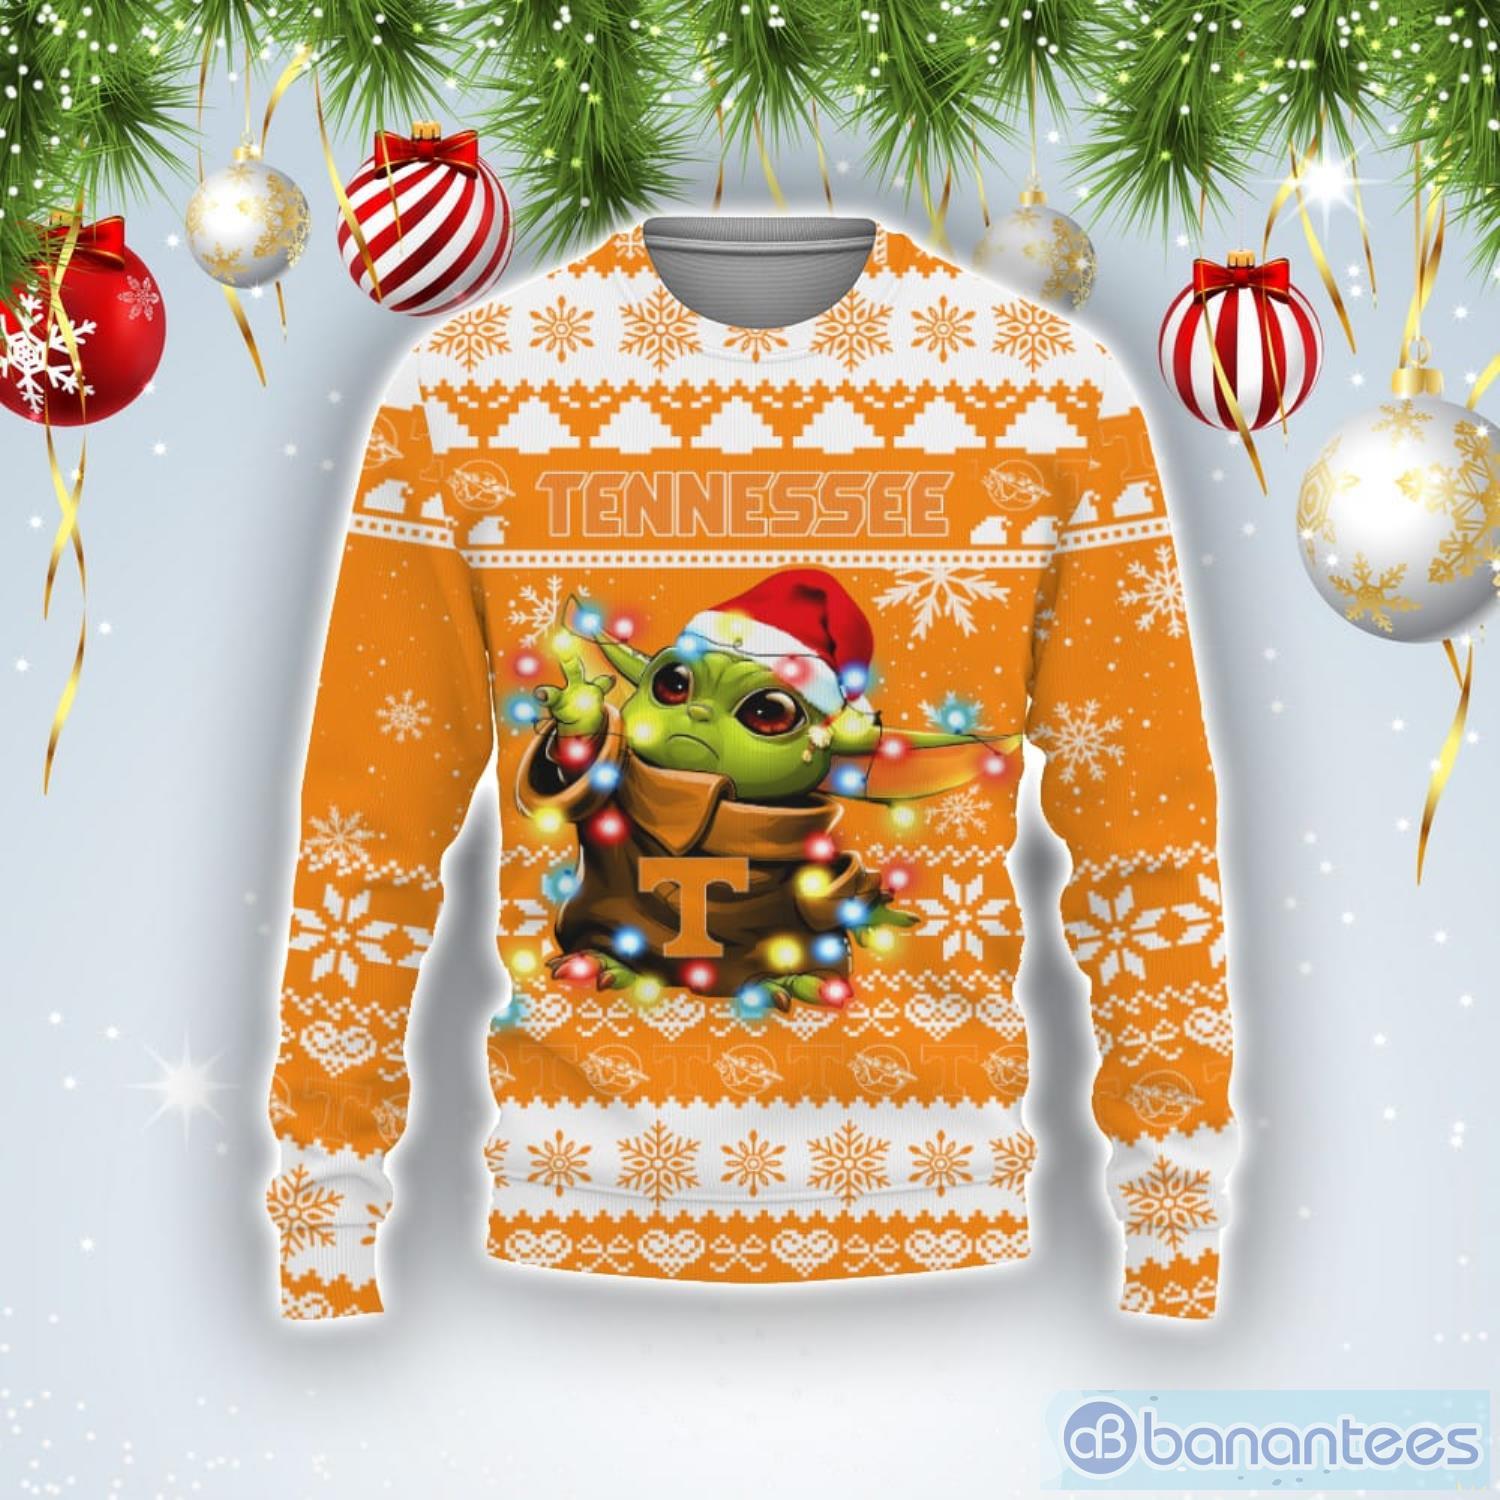 Tennessee Volunteers Baby Yoda Star Wars Sports Football American Ugly Christmas Sweater Product Photo 1